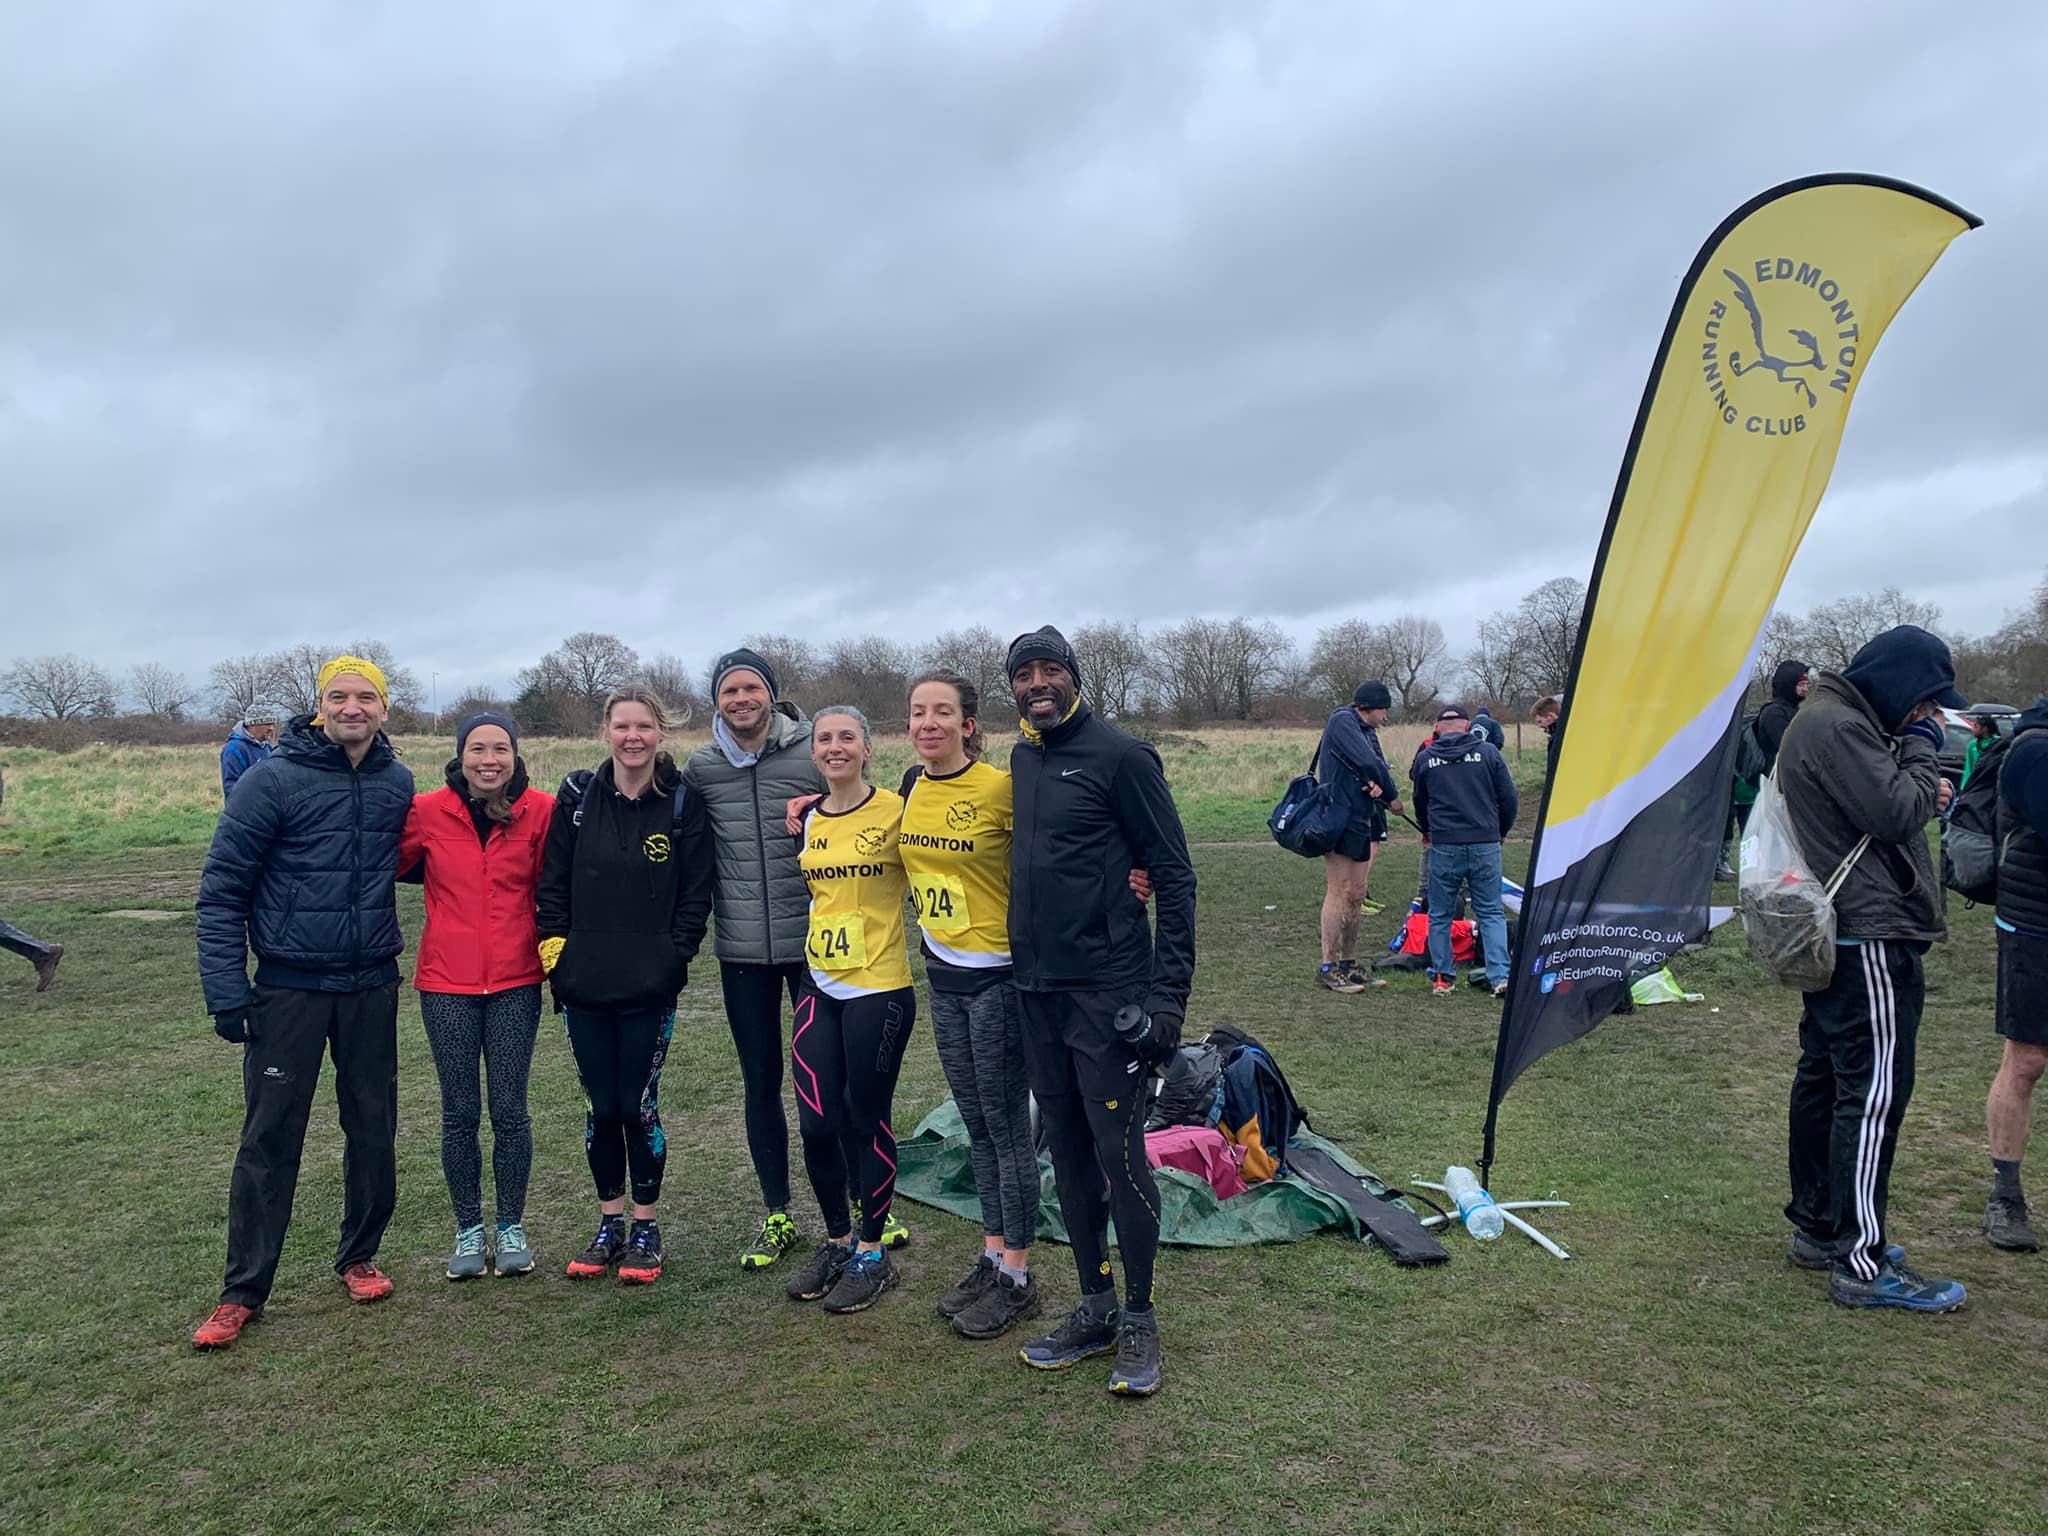 Chingford League XC relays - race report by Austen.